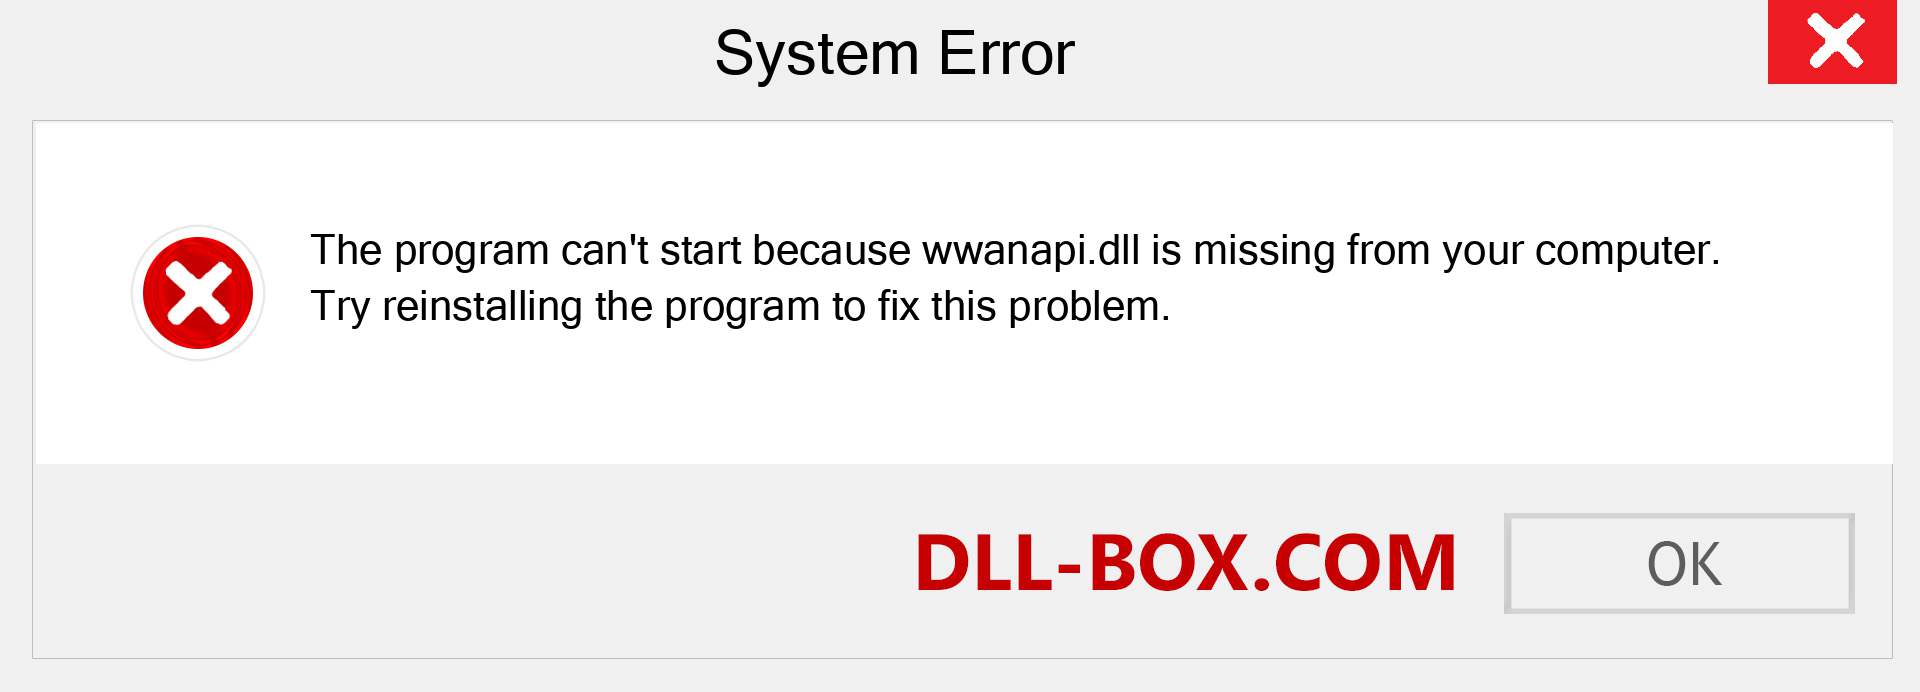  wwanapi.dll file is missing?. Download for Windows 7, 8, 10 - Fix  wwanapi dll Missing Error on Windows, photos, images